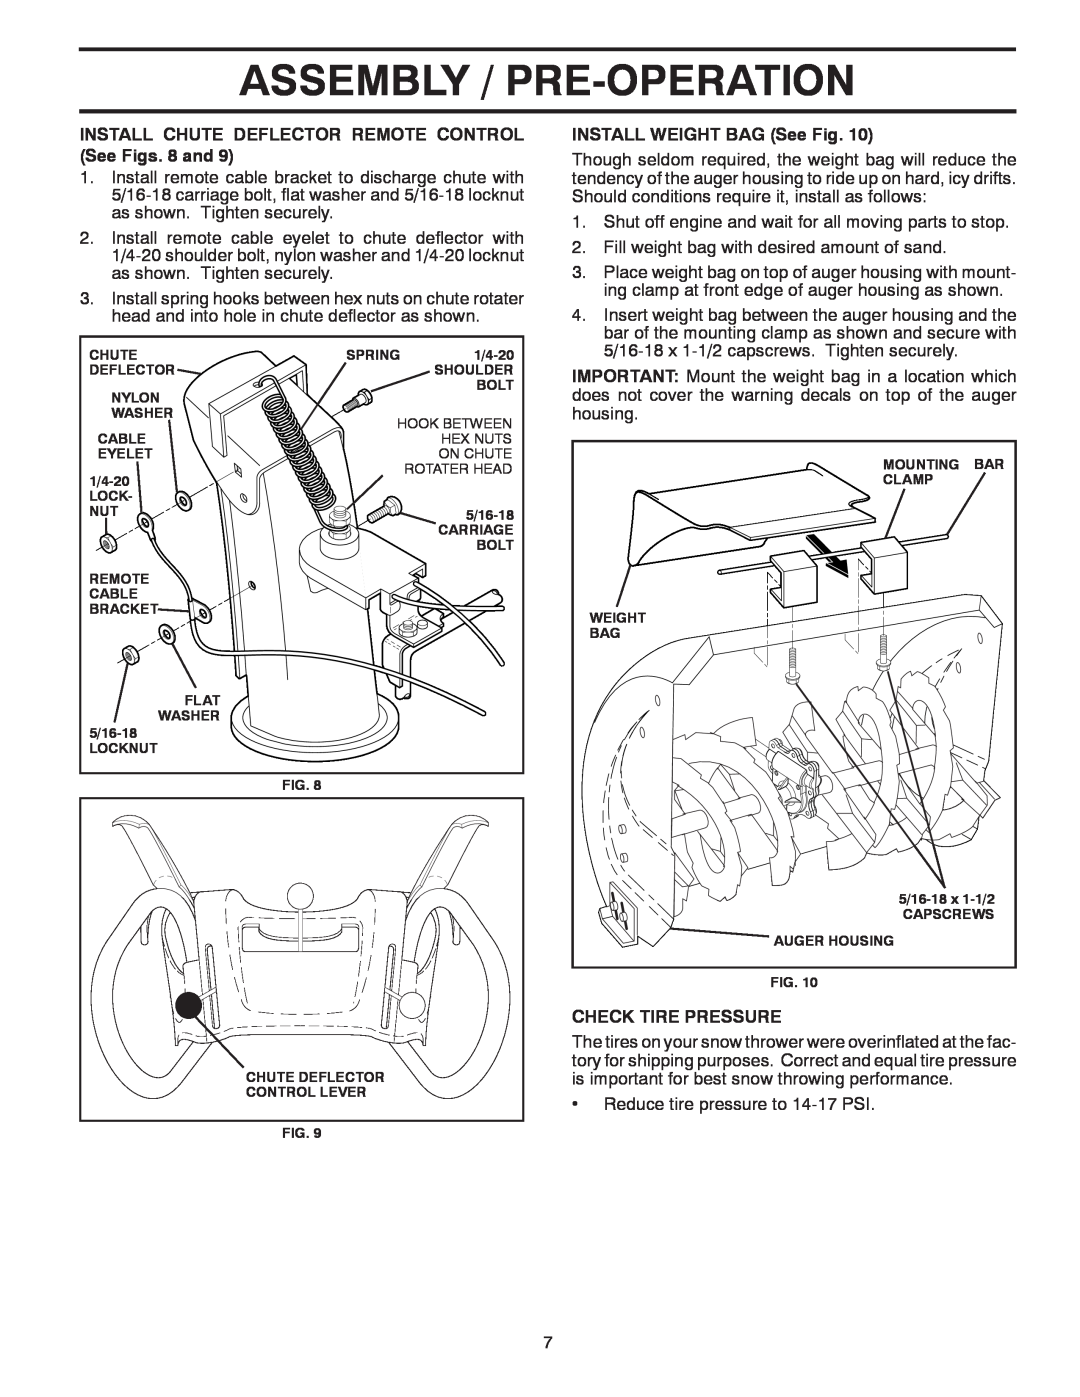 Poulan 185143 Assembly / Pre-Operation, INSTALL CHUTE DEFLECTOR REMOTE CONTROL See Figs. 8 and, INSTALL WEIGHT BAG See Fig 